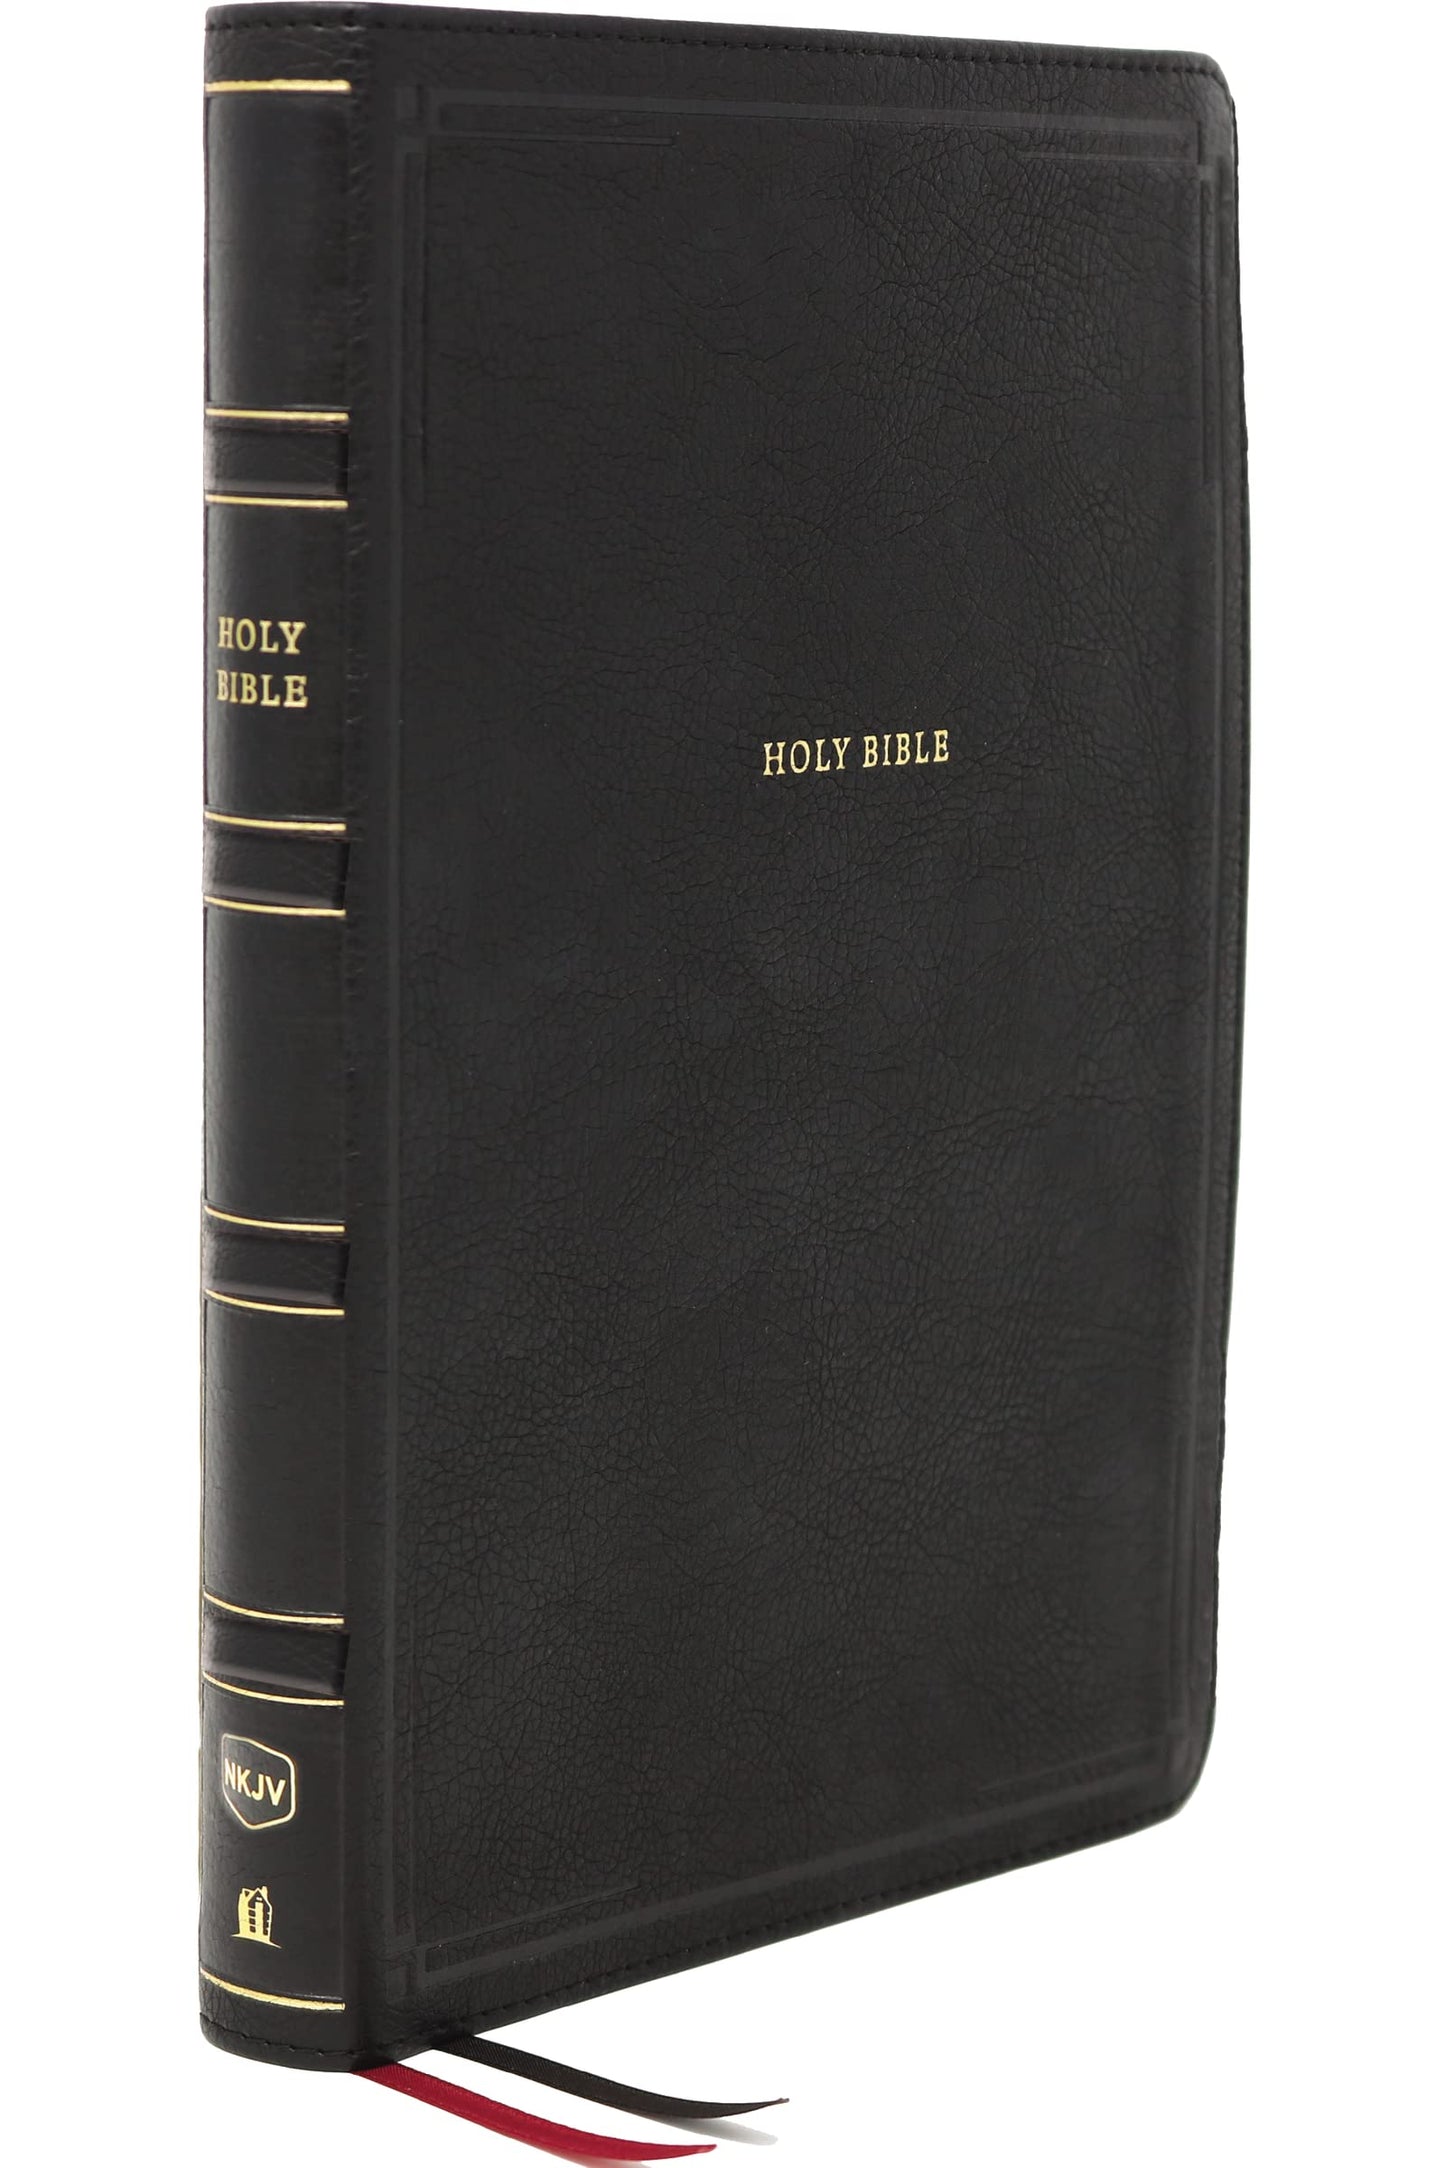 NKJV Deluxe Thinline Reference Bible Comfort Print